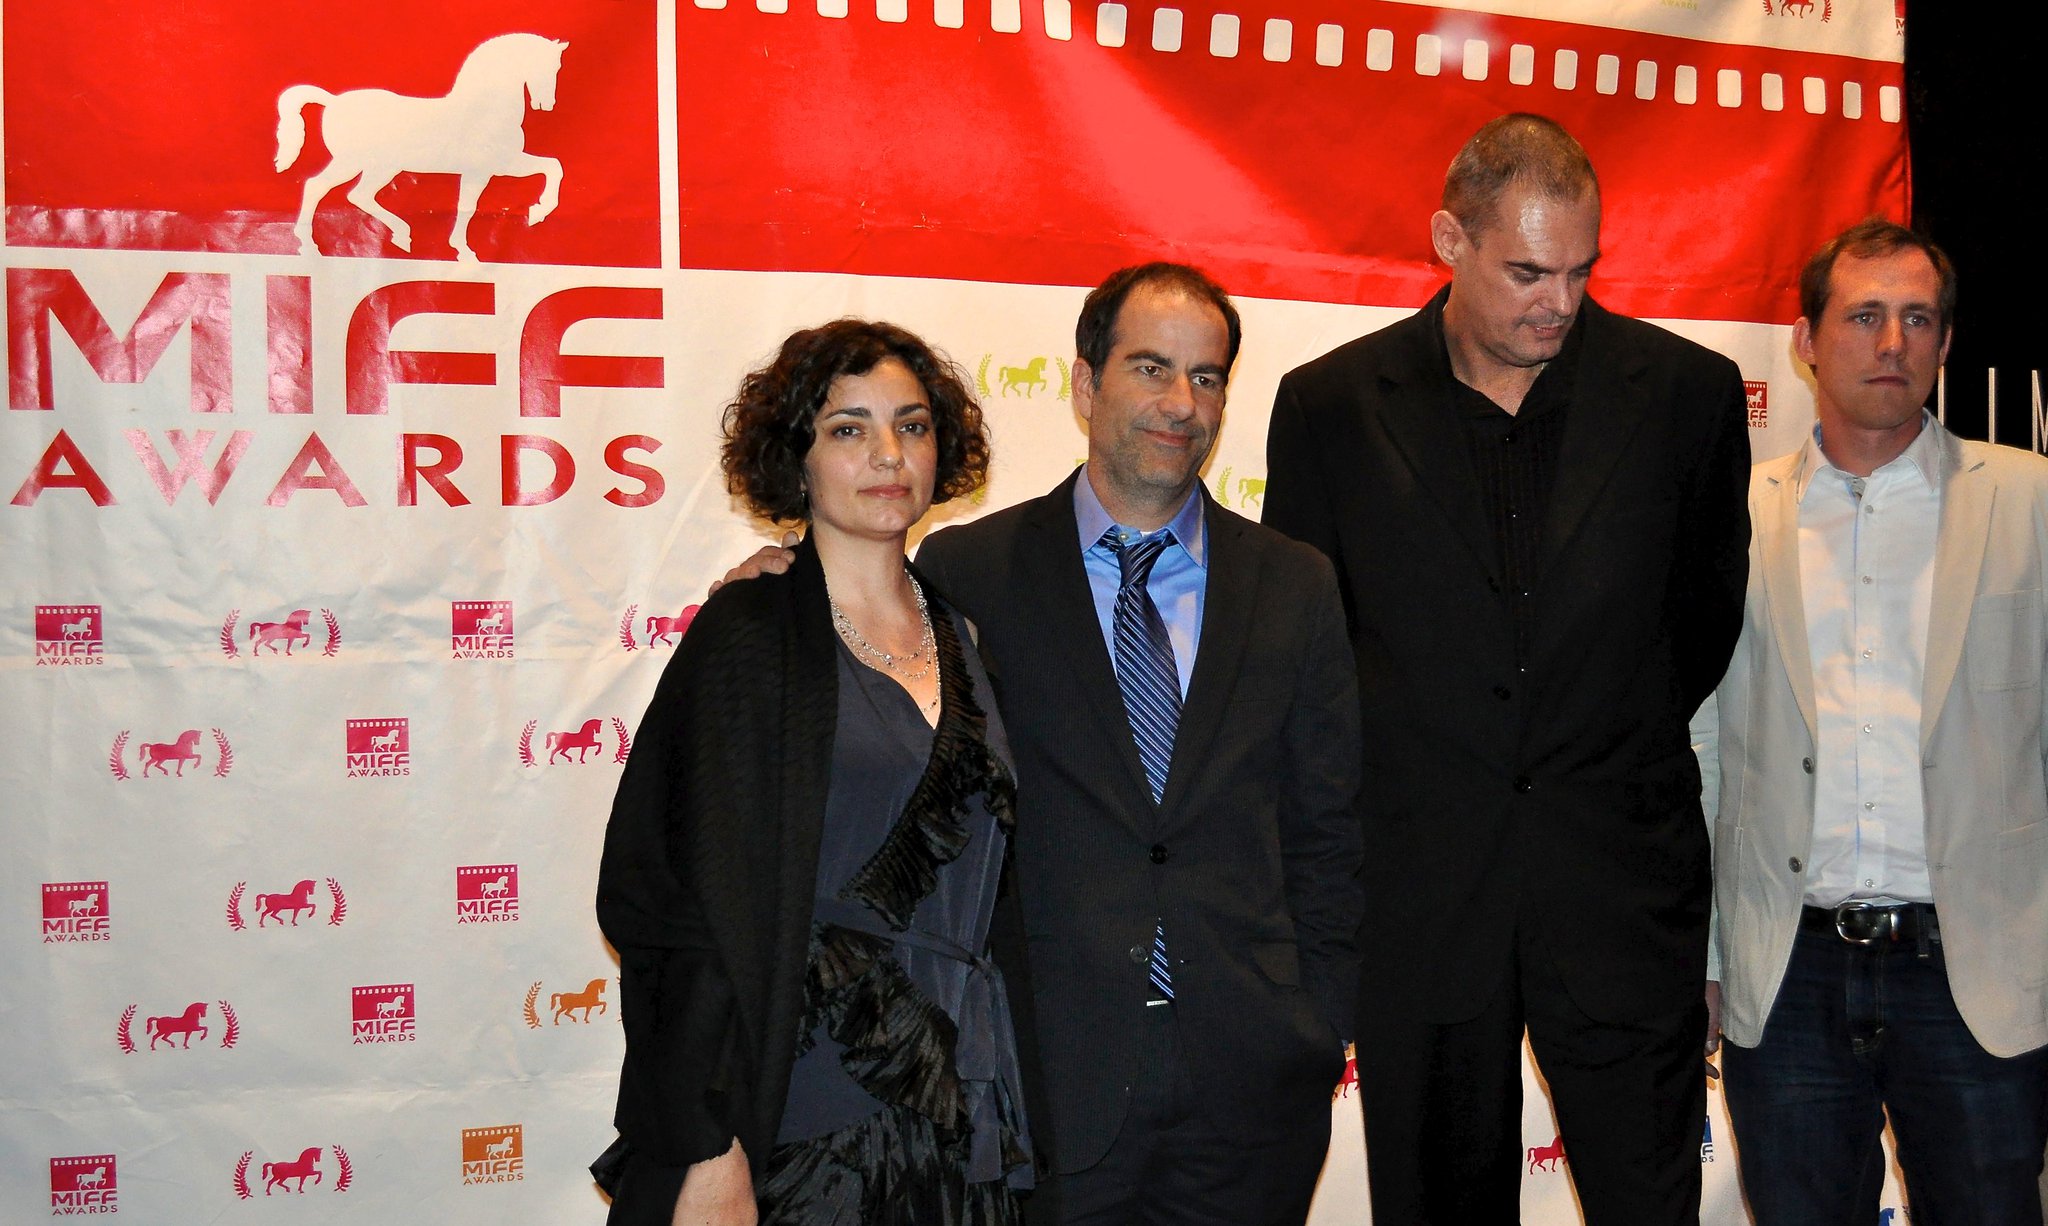 Erica Senese, Billy Senese, Jeremy Childs and Jon Rodgers on the red carpet at the Milan International film festival for The Suicide Tapes.